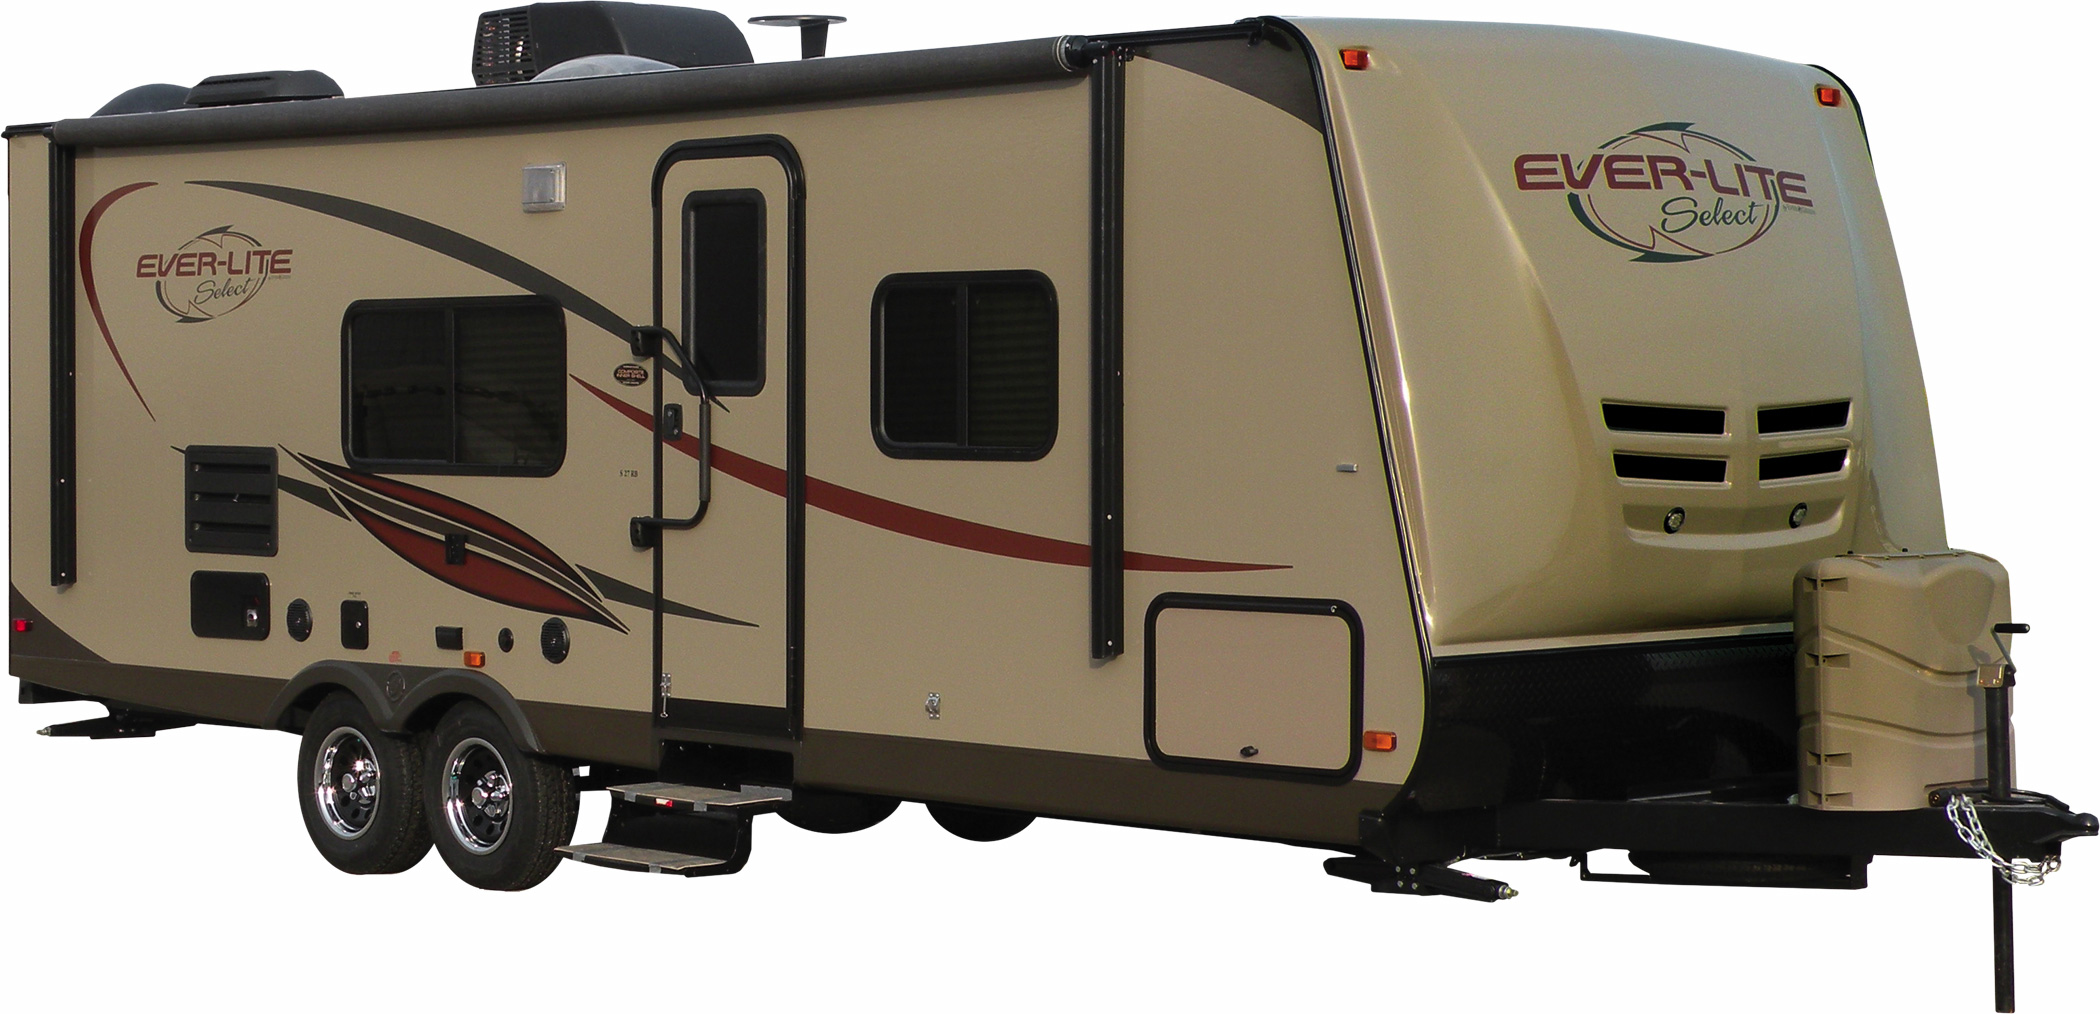 Conventional Travel Trailer.